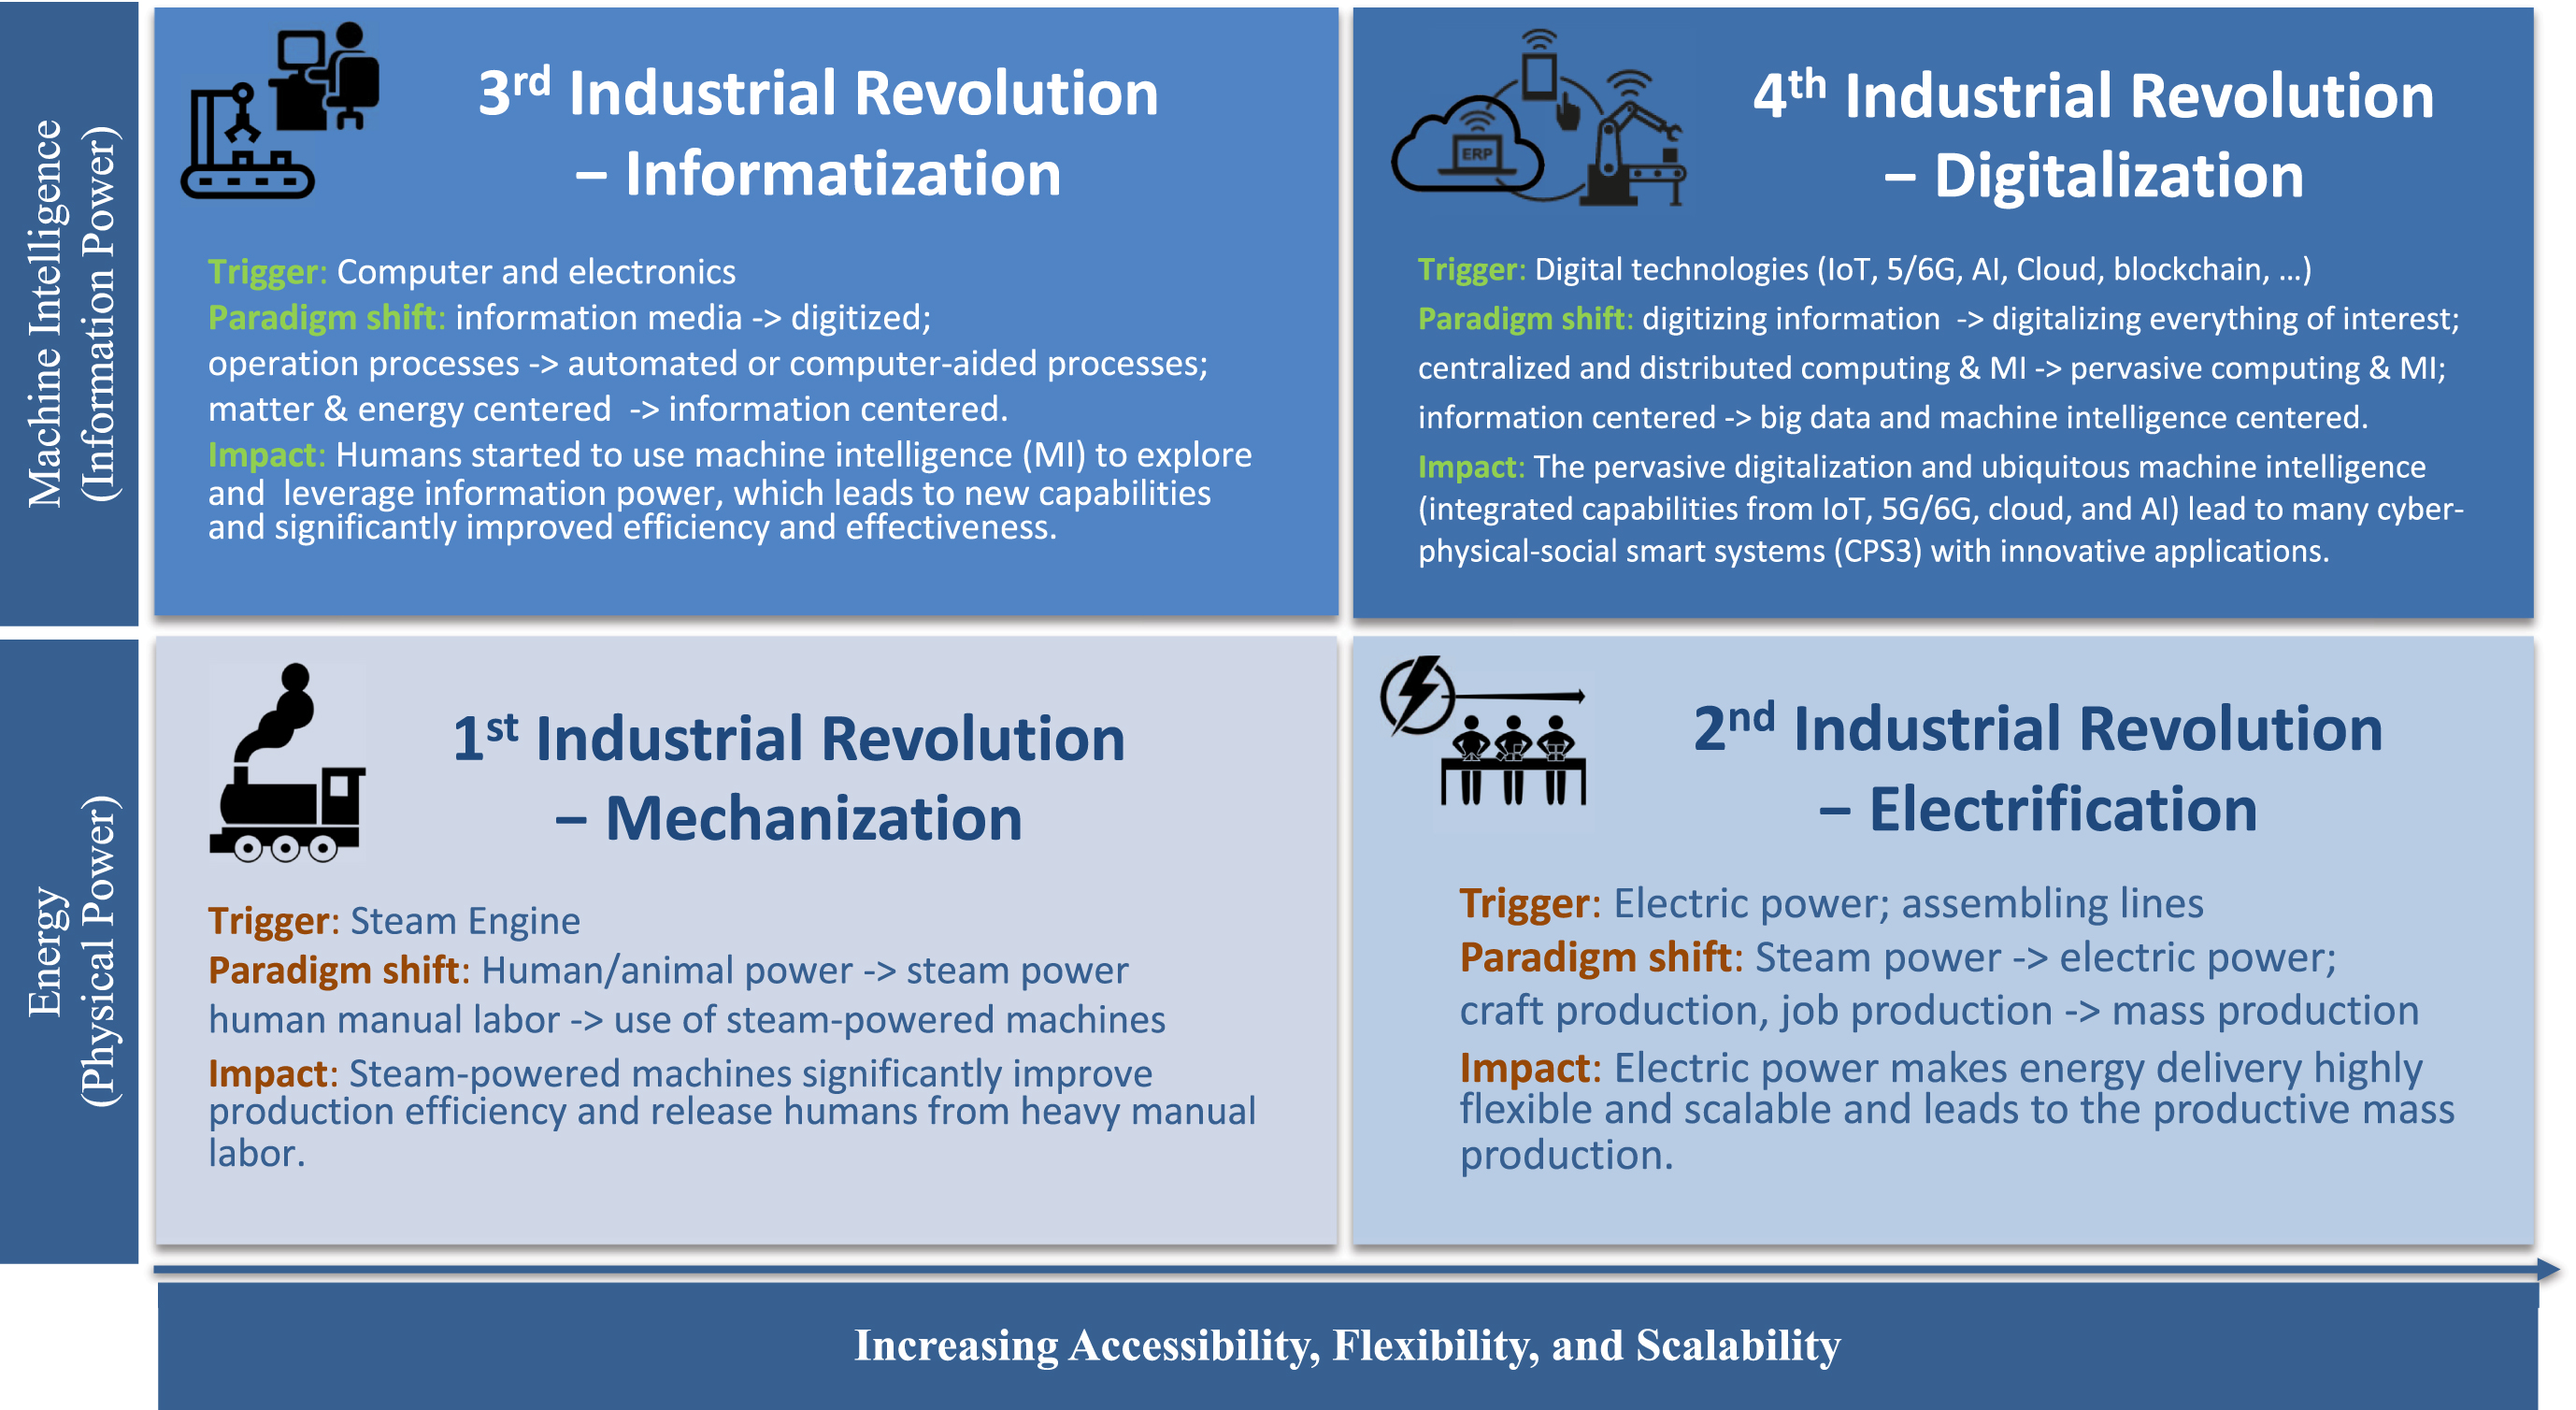 Four waves of Industrial Revolutions and their profound impacts. Every wave was triggered by disruptive technologies and followed by paradigm shifts in industrial operations.